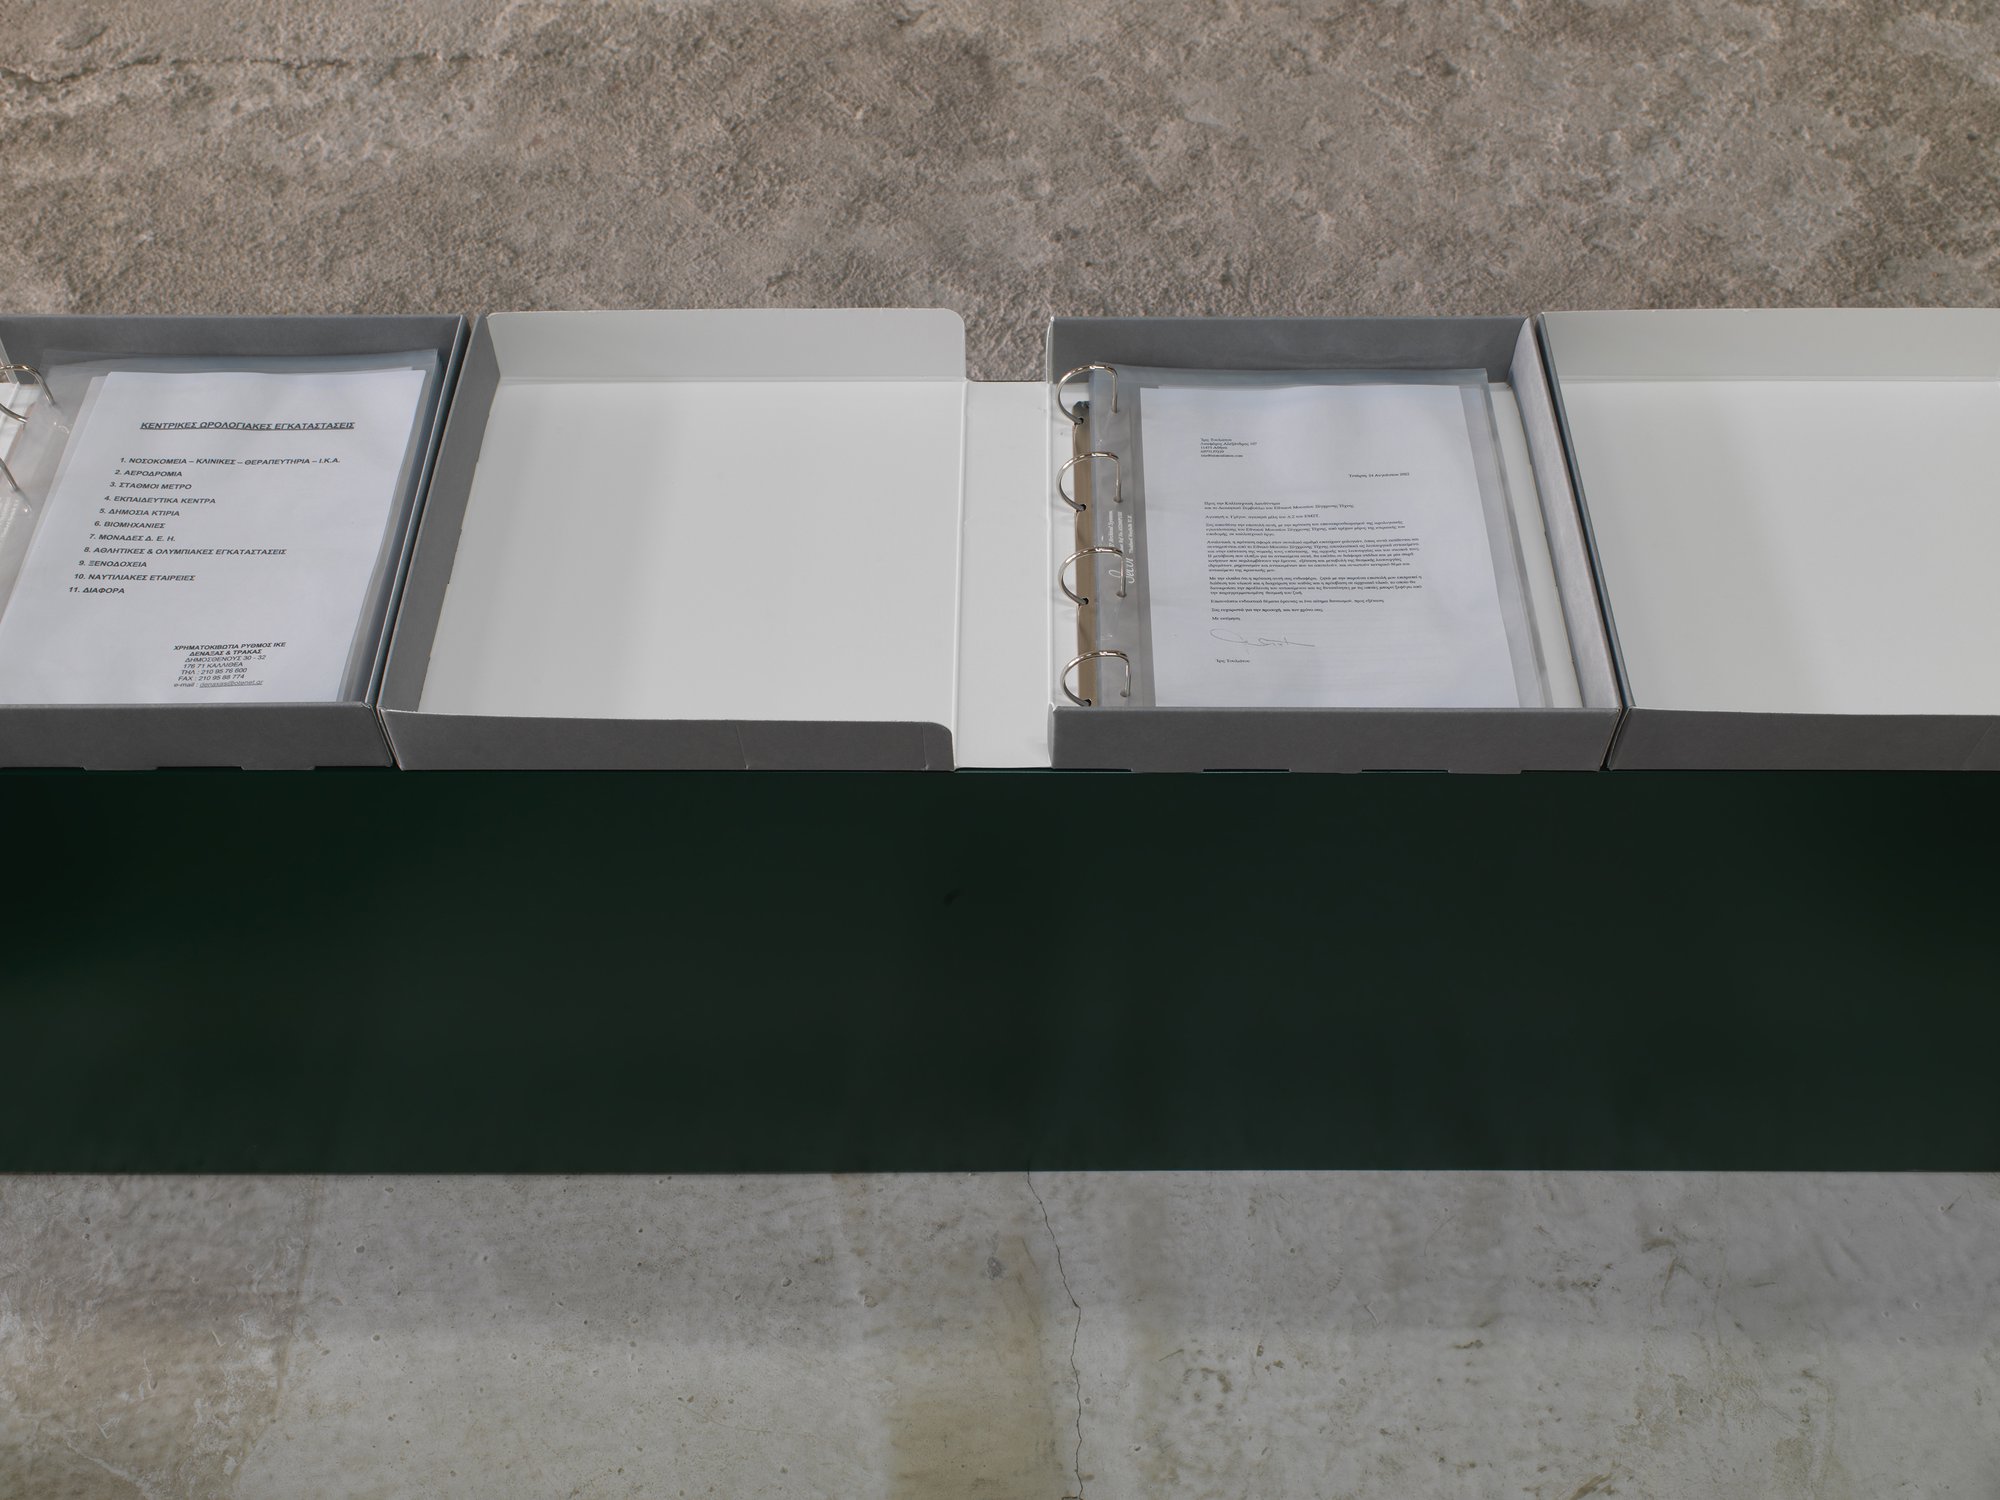 Iris Touliatou, mother material, four archival grey filing dossiers: 32,5 x 31 x 5,5 cm each (12 3/4 x 12 1/4 x 2 1/8 in each), A4 archival transparencies, official documents, correspodance, requests, operation manuals, lacquered MDF pedestal in Rodeo green (RAL 6005), in progress, 2022